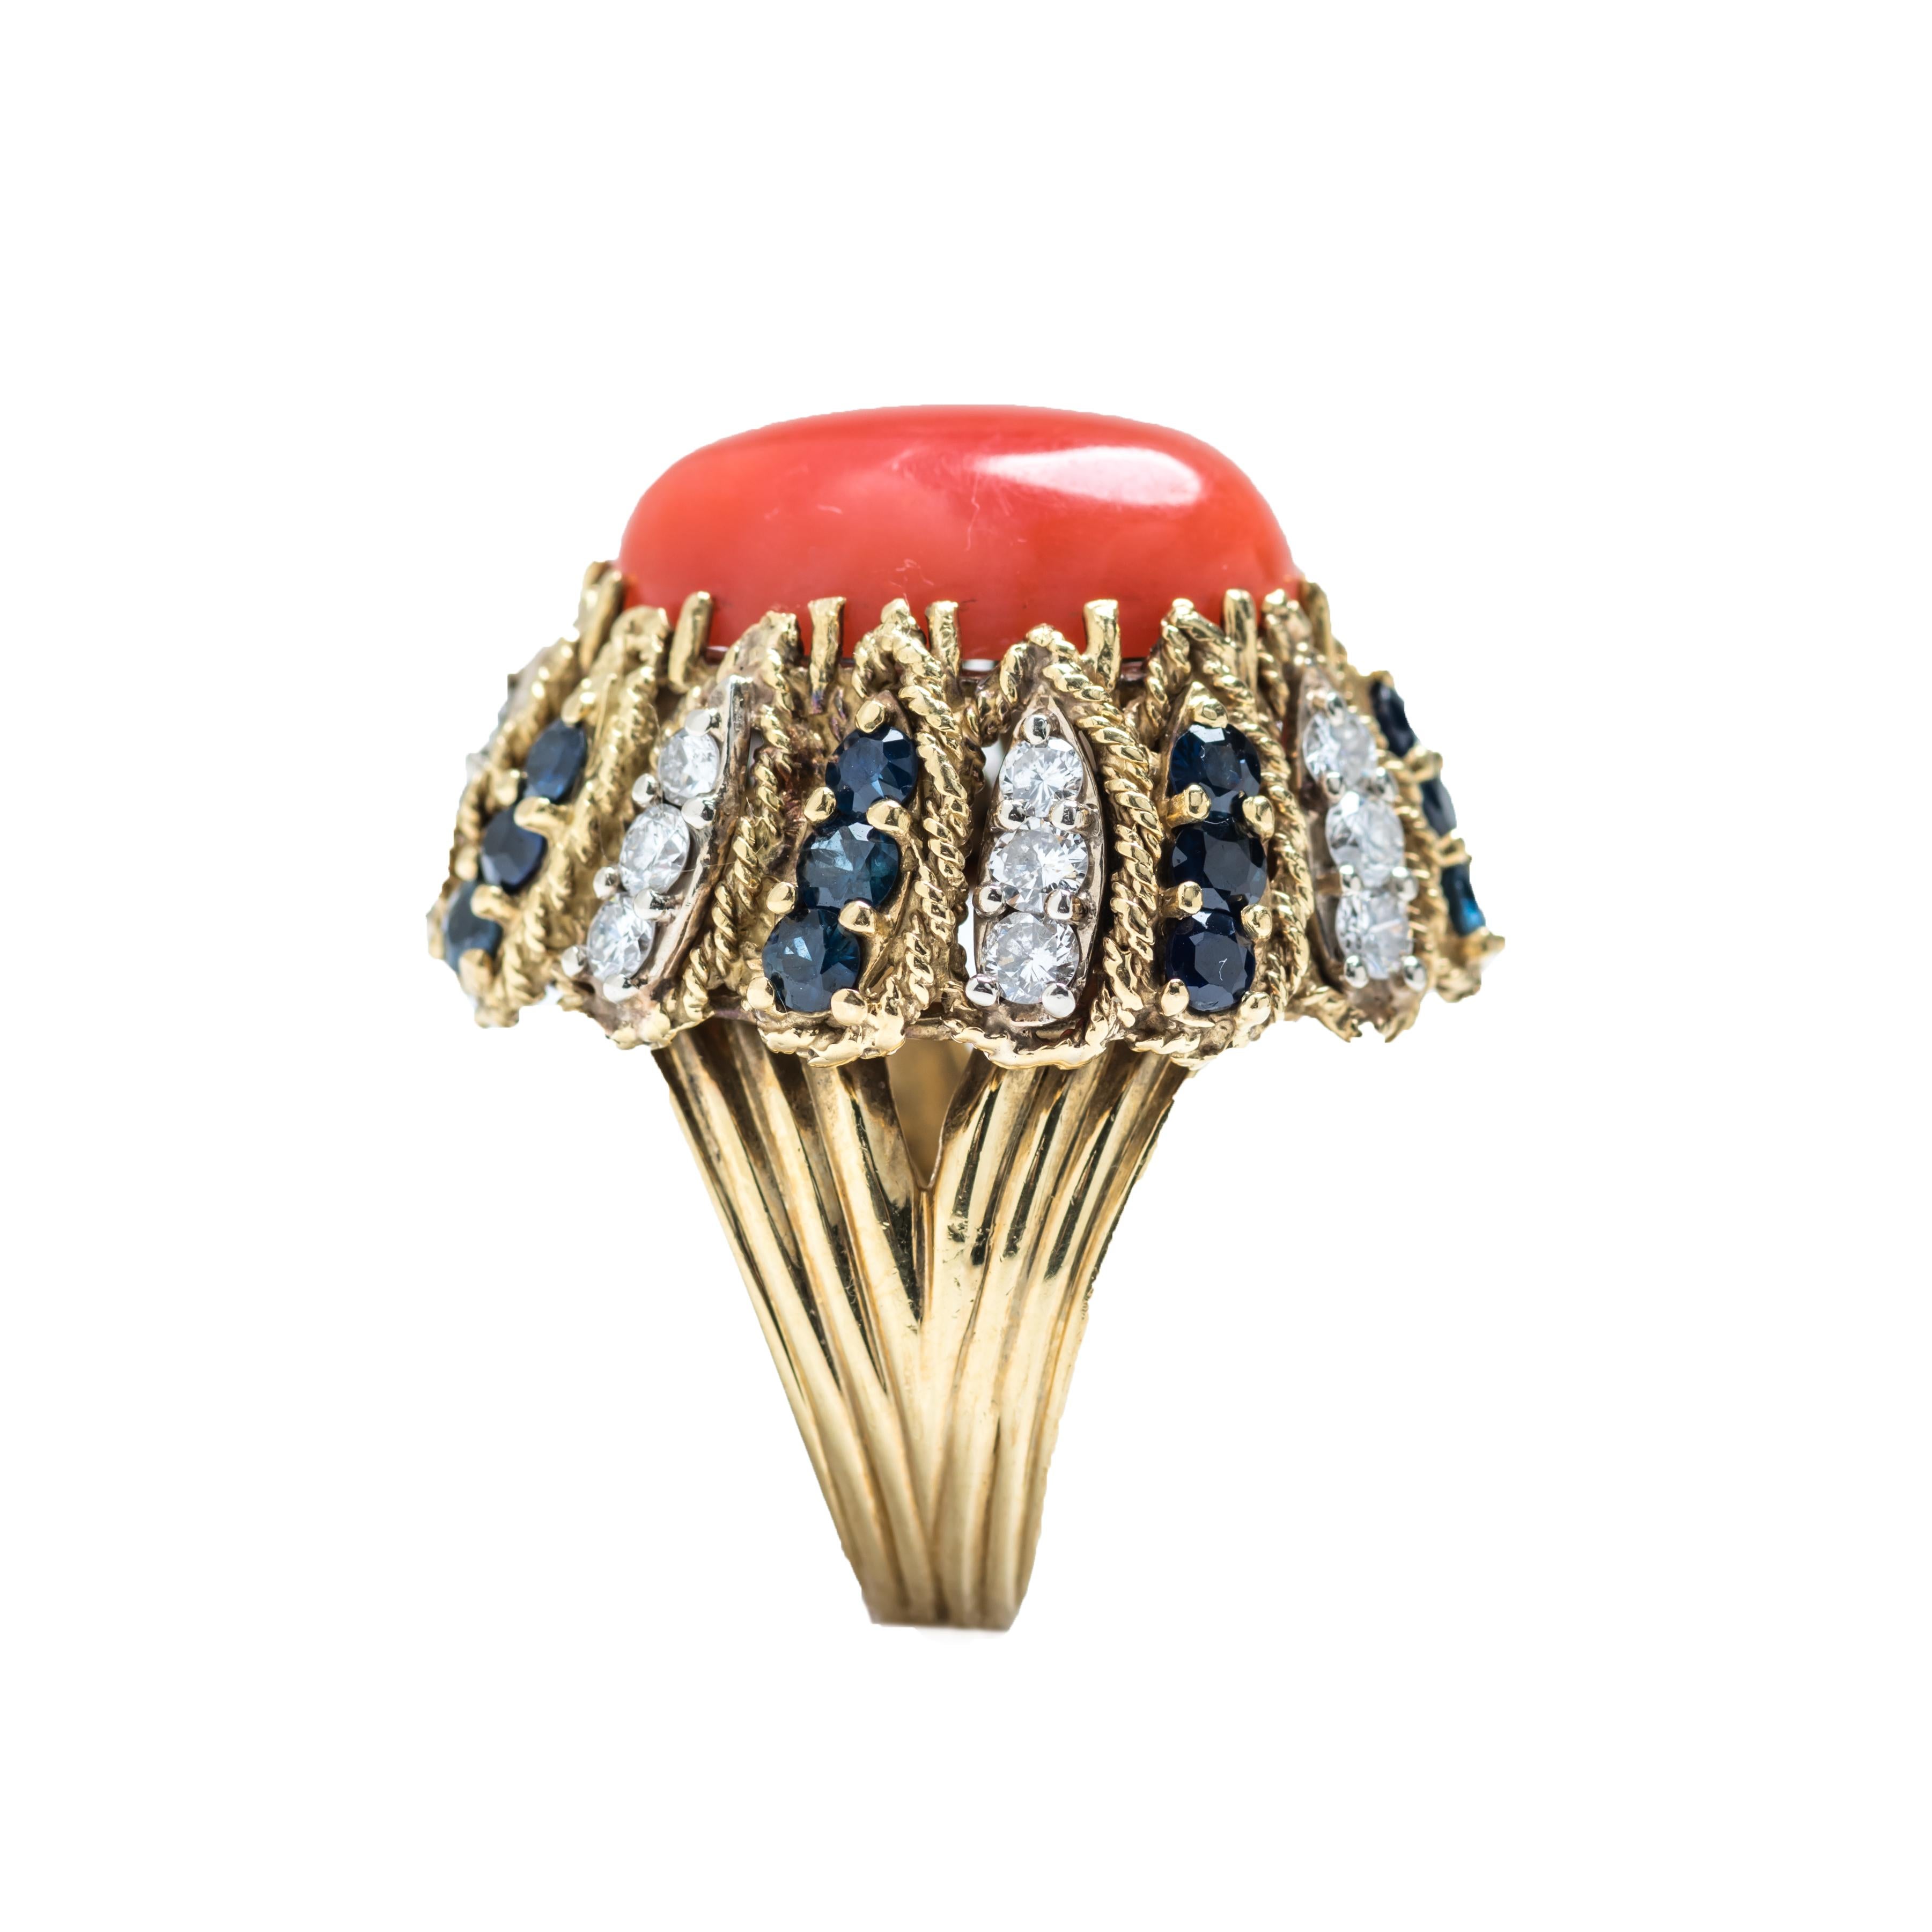 Women's 18 Karat Gold, Diamond, Sapphire and Cabochon Coral Italian Ring For Sale